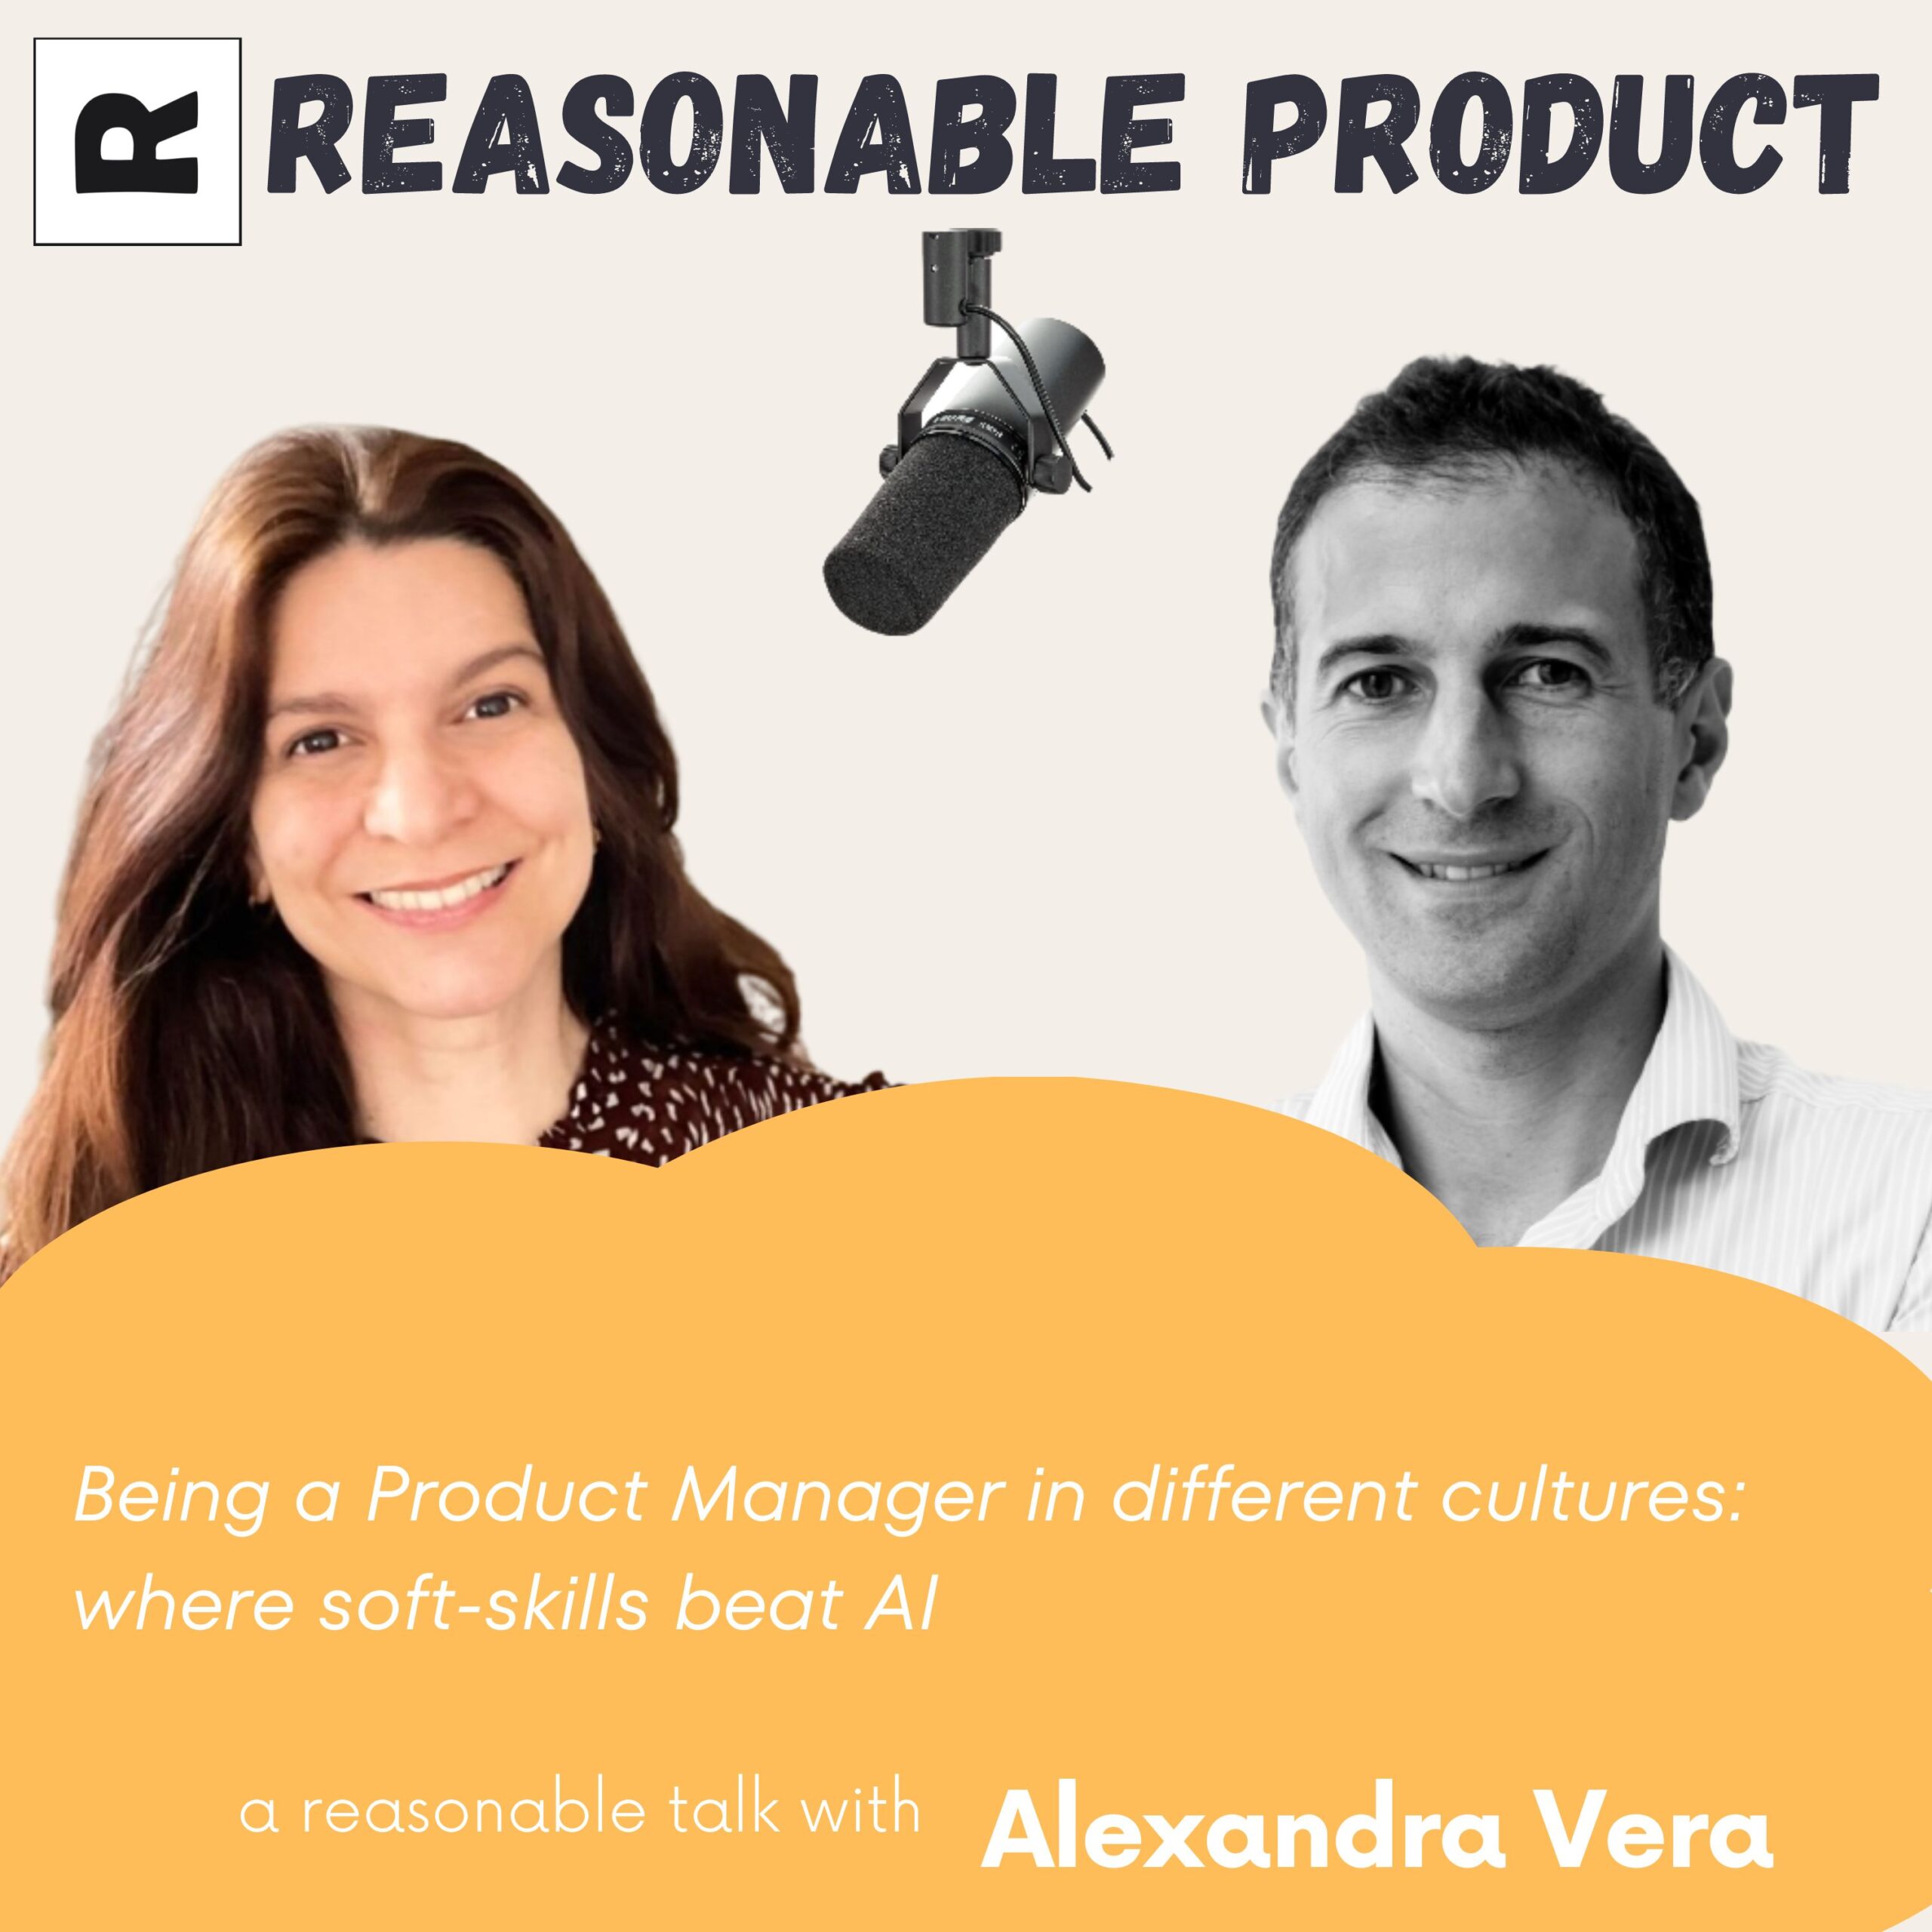 Being a Product Manager in different cultures: where soft-skills beat AI – With Alexandra Vera (Carfax)